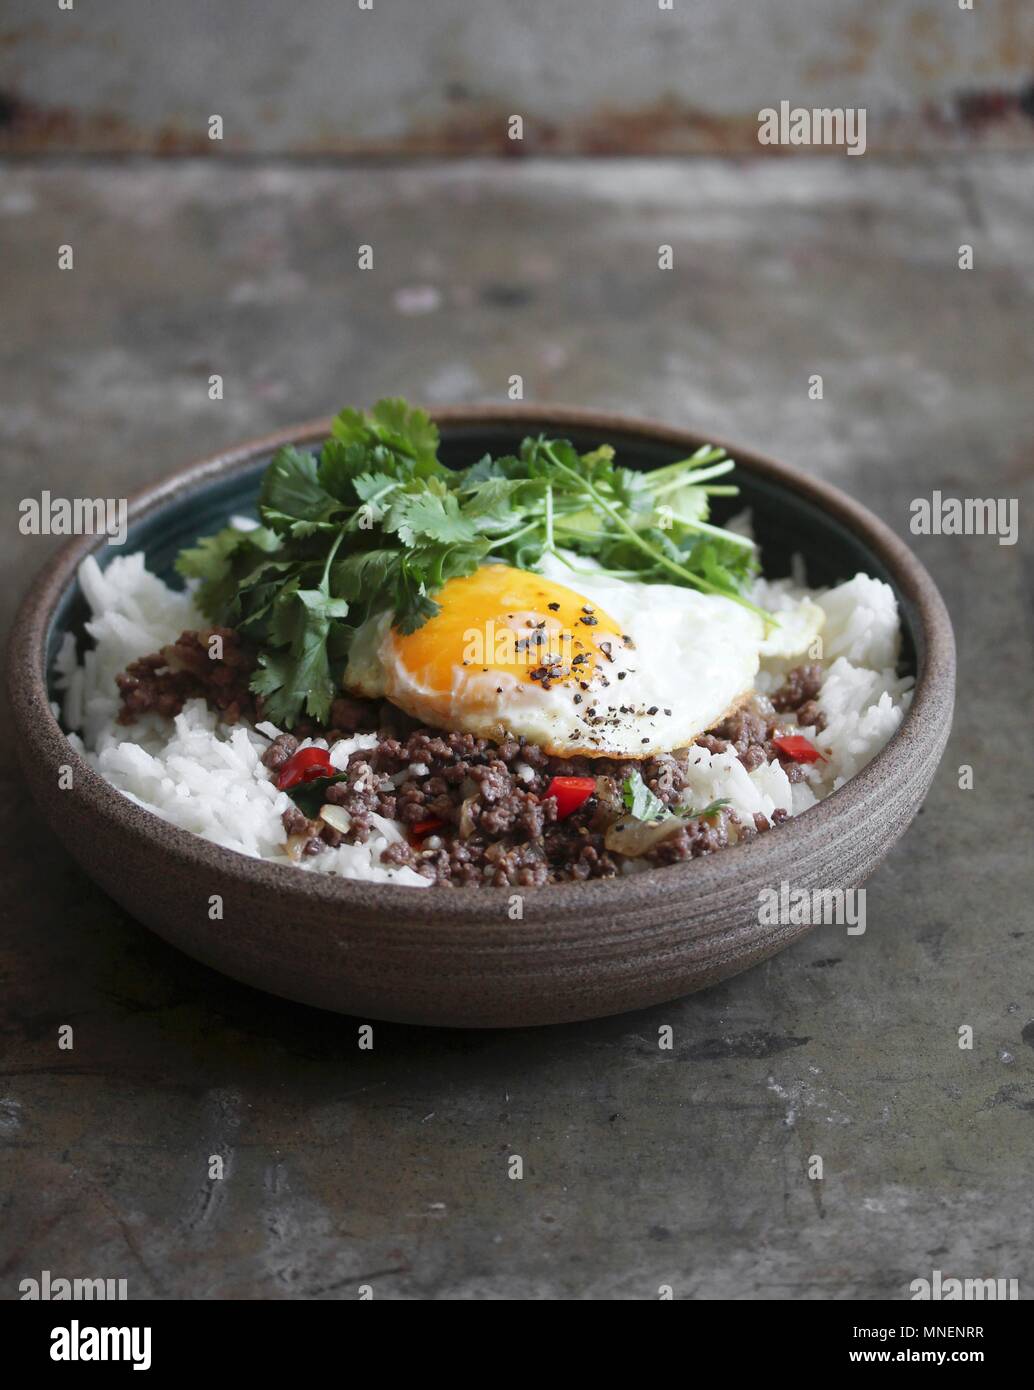 Pad kra Pao (mince with basil and a fried egg, Thailand) Stock Photo